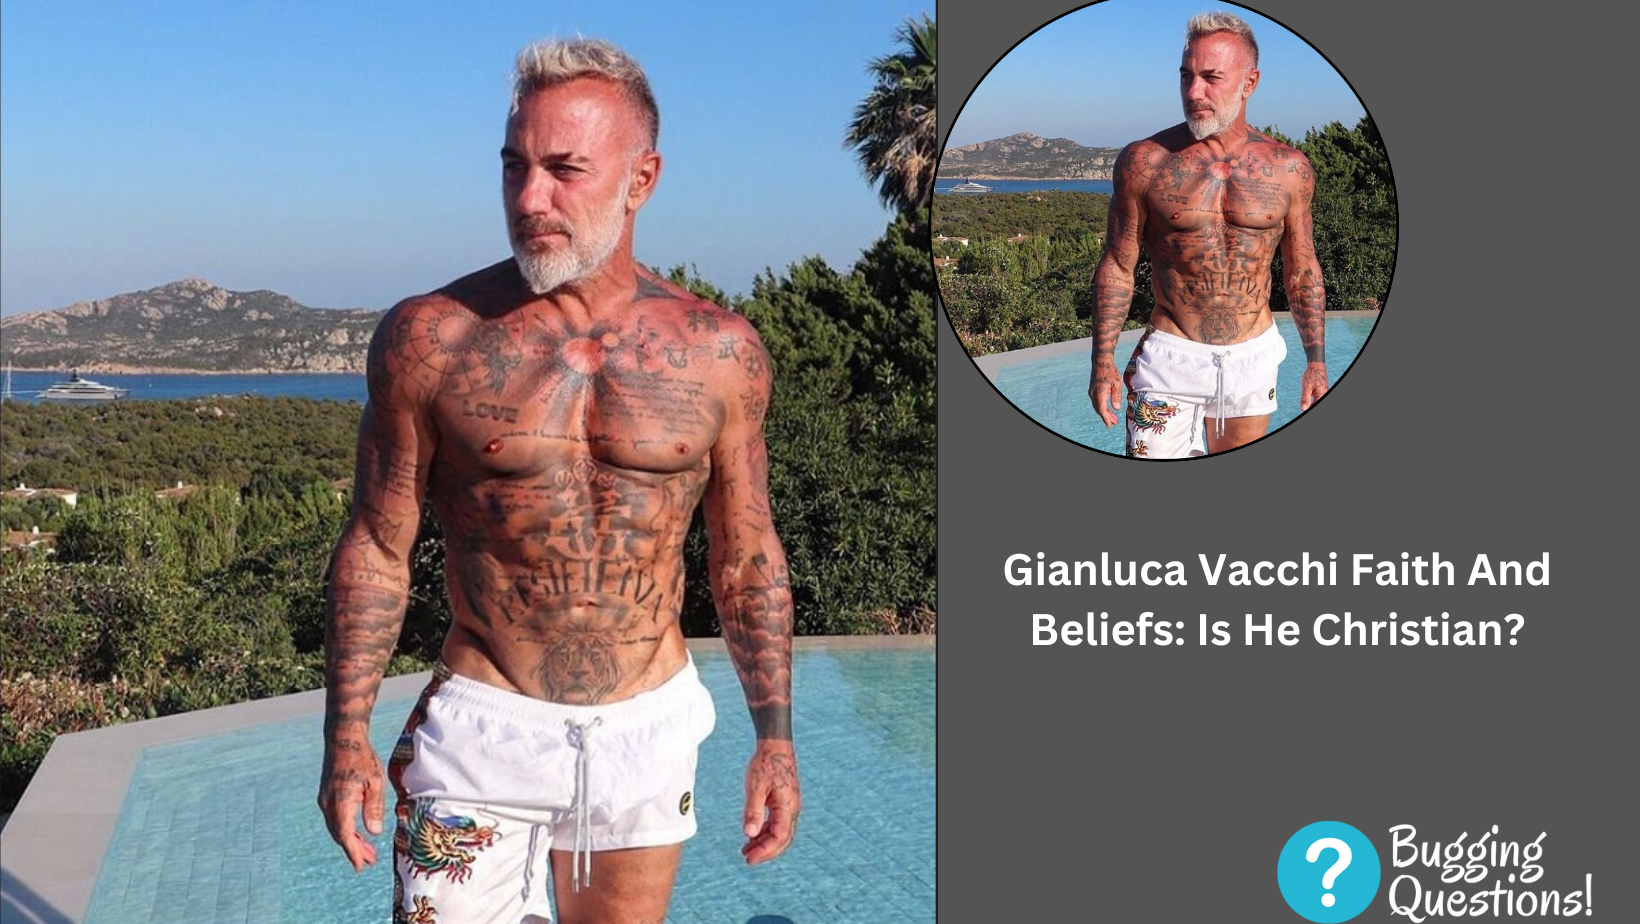 Gianluca Vacchi Faith And Beliefs: Is He Christian?